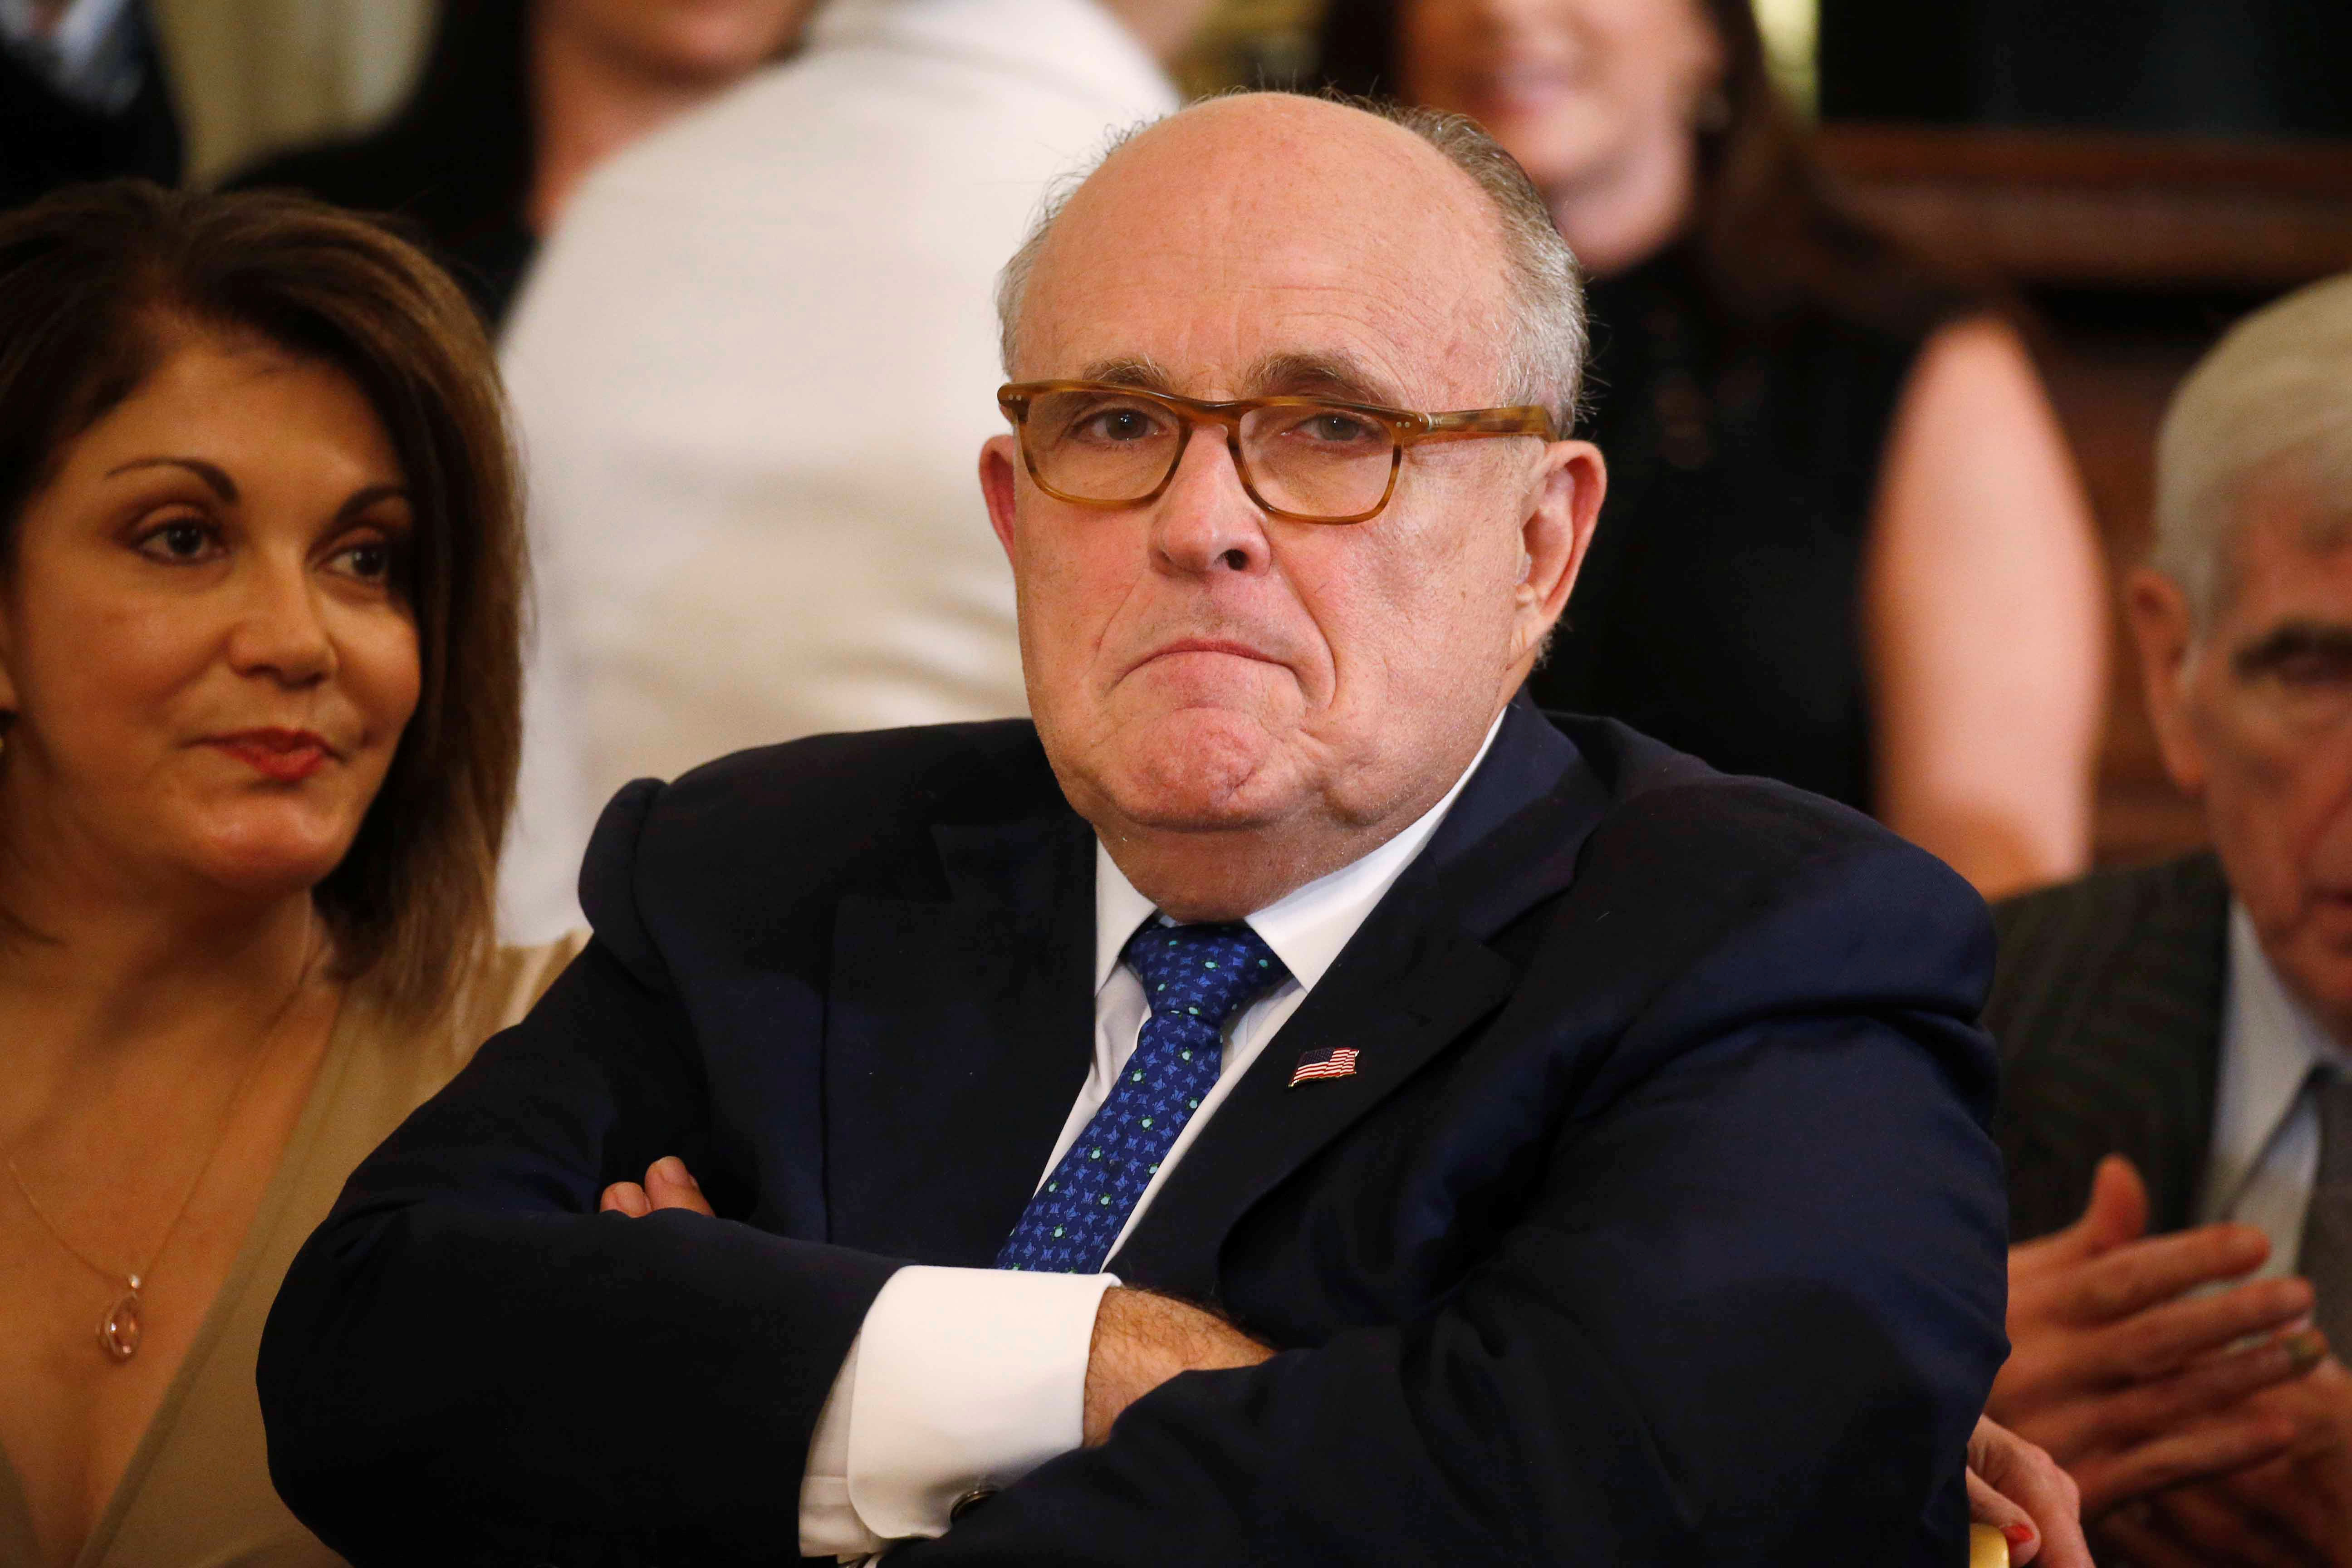 WHOOPS: Giuliani Busted With Doctored Pelosi Video As He Tweets About Integrity